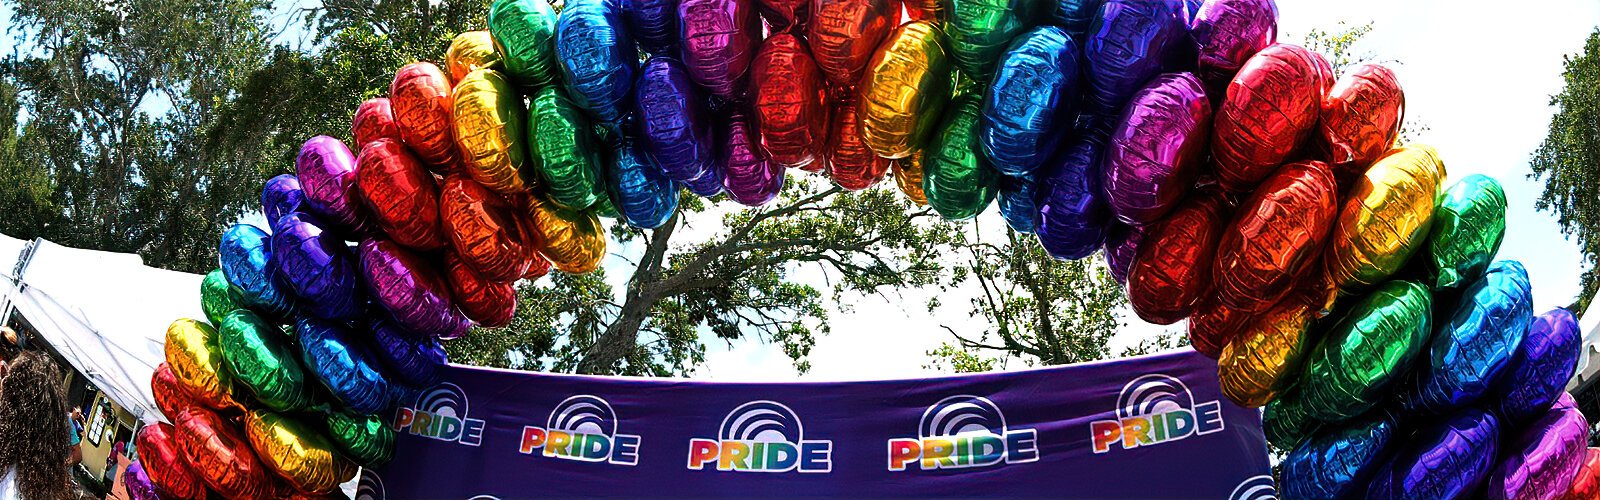 A symbol of the pride and diversity of the LGBTQ+ community, rainbow colors are used in Pride Month event decorations such as these striking balloons on display at the St Pete Pride street festival.